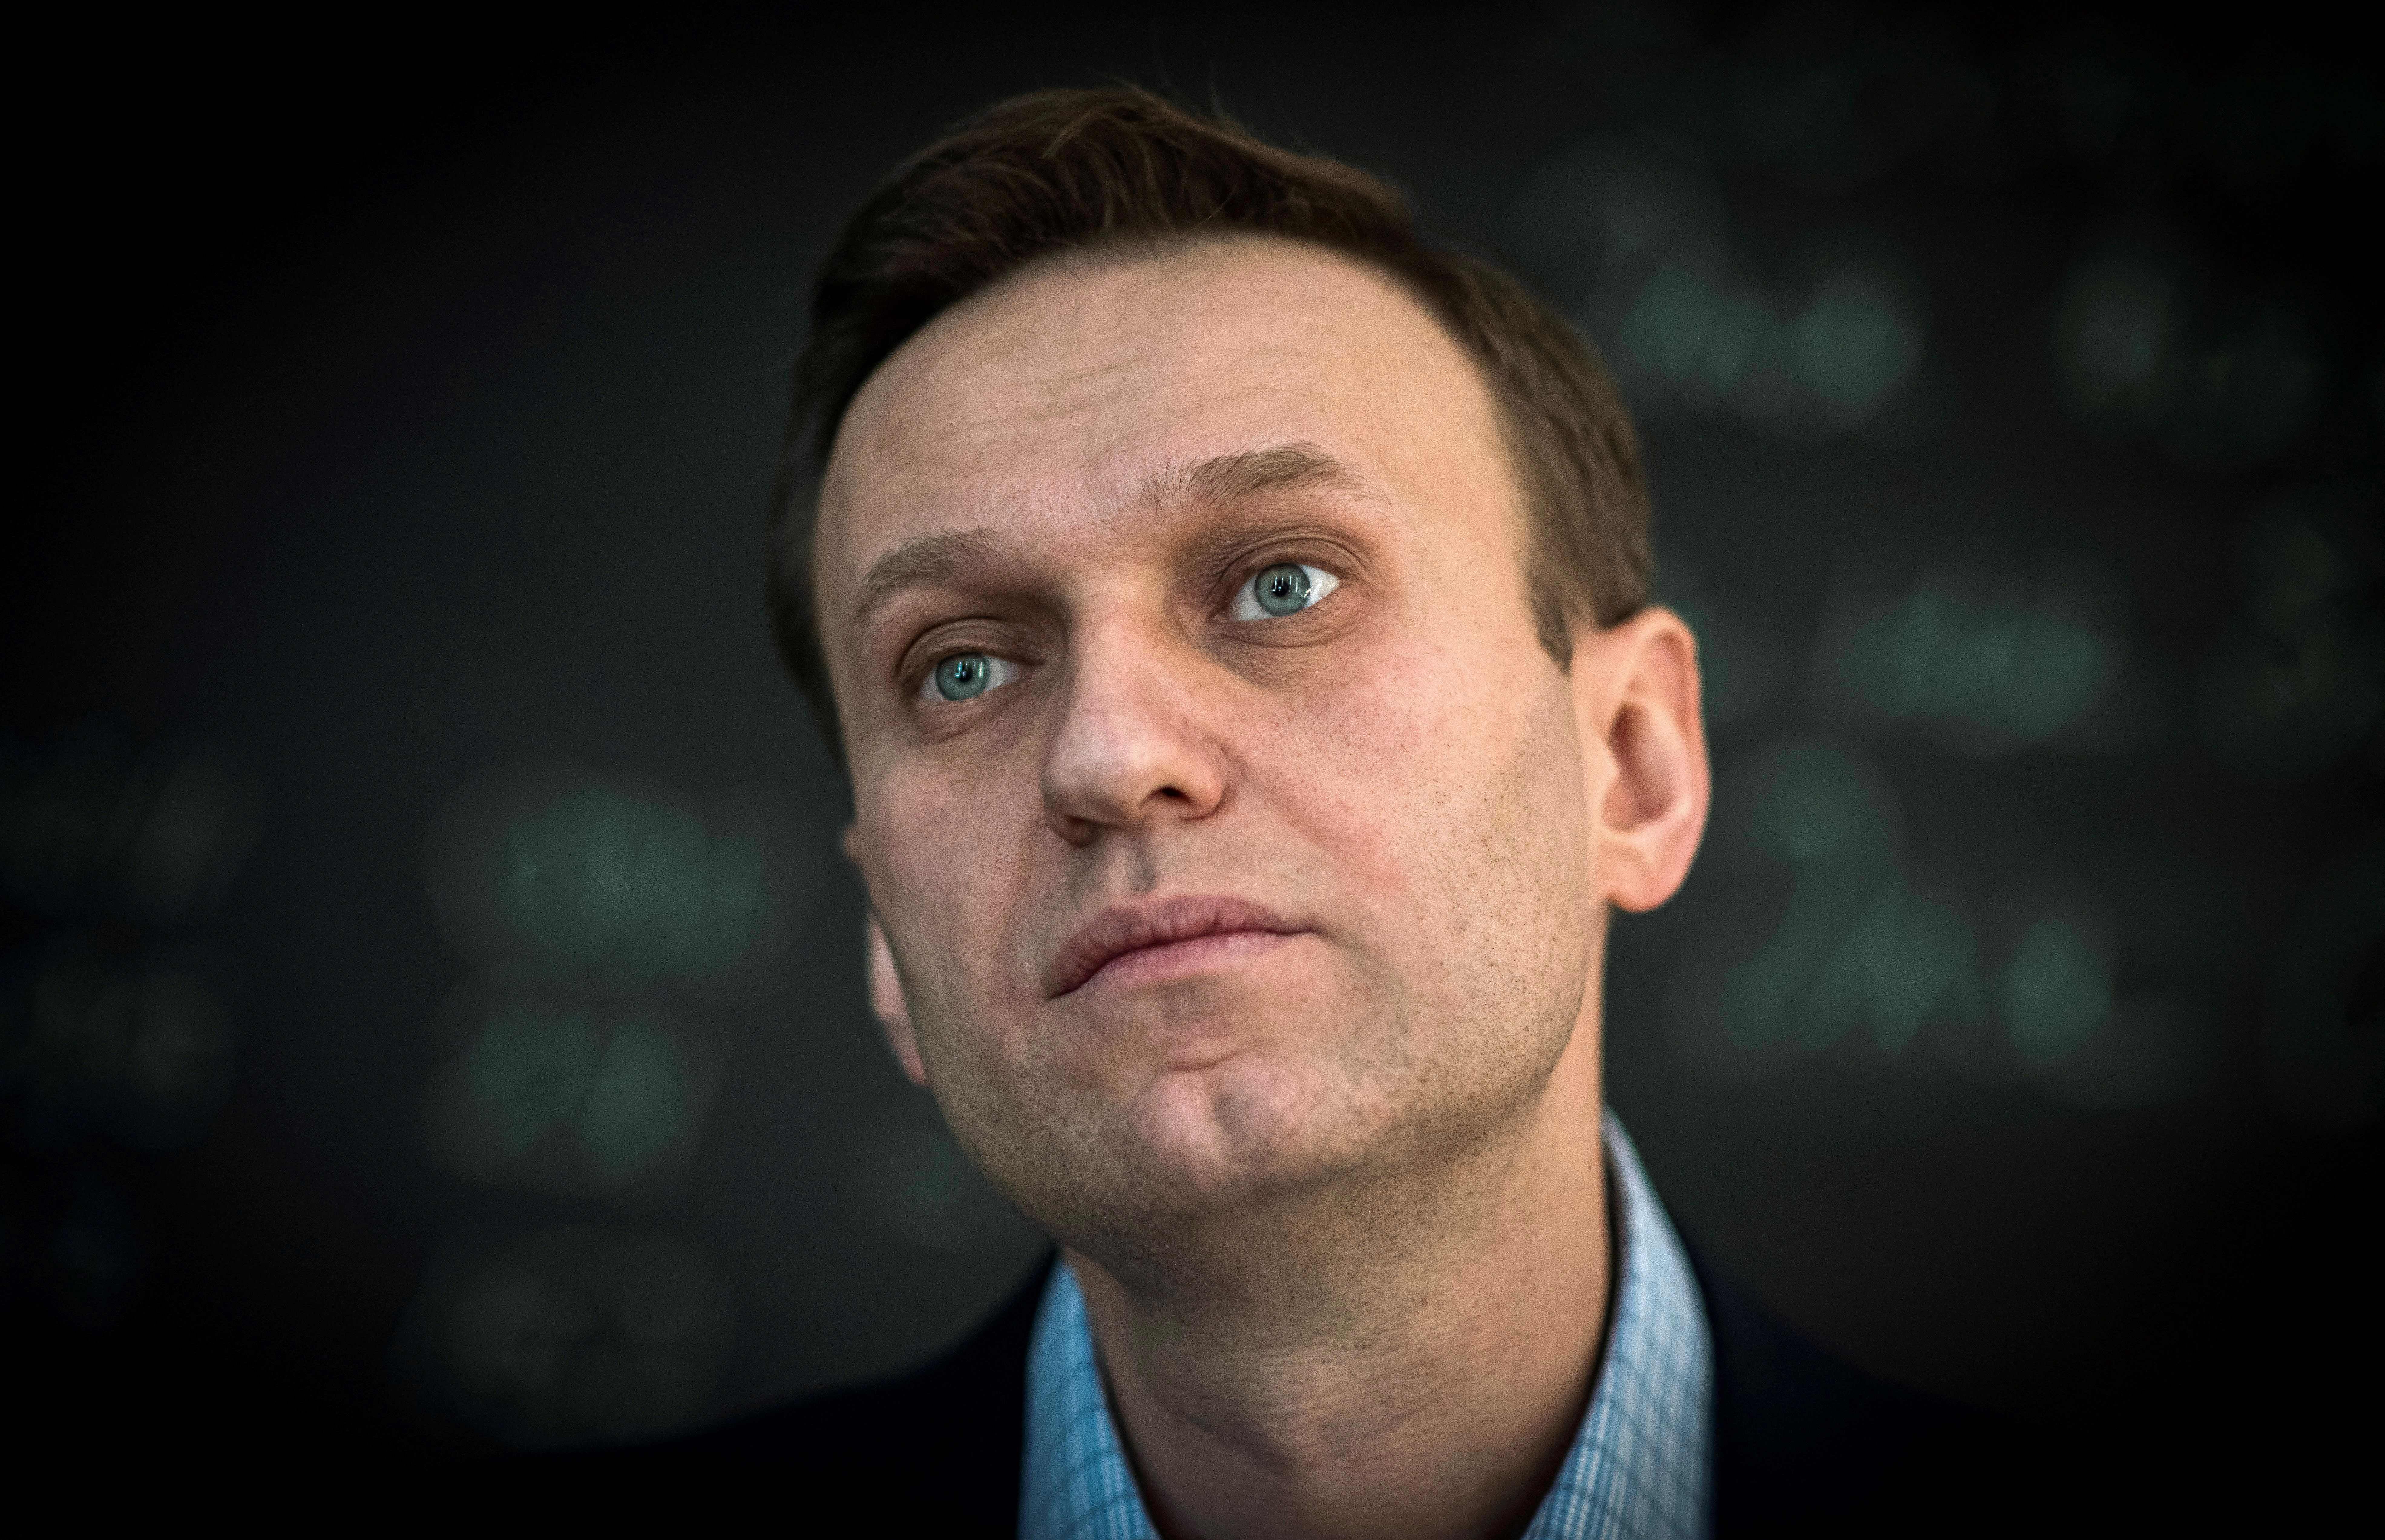 Russian opposition leader Alexei Navalny died behind bars in Russia